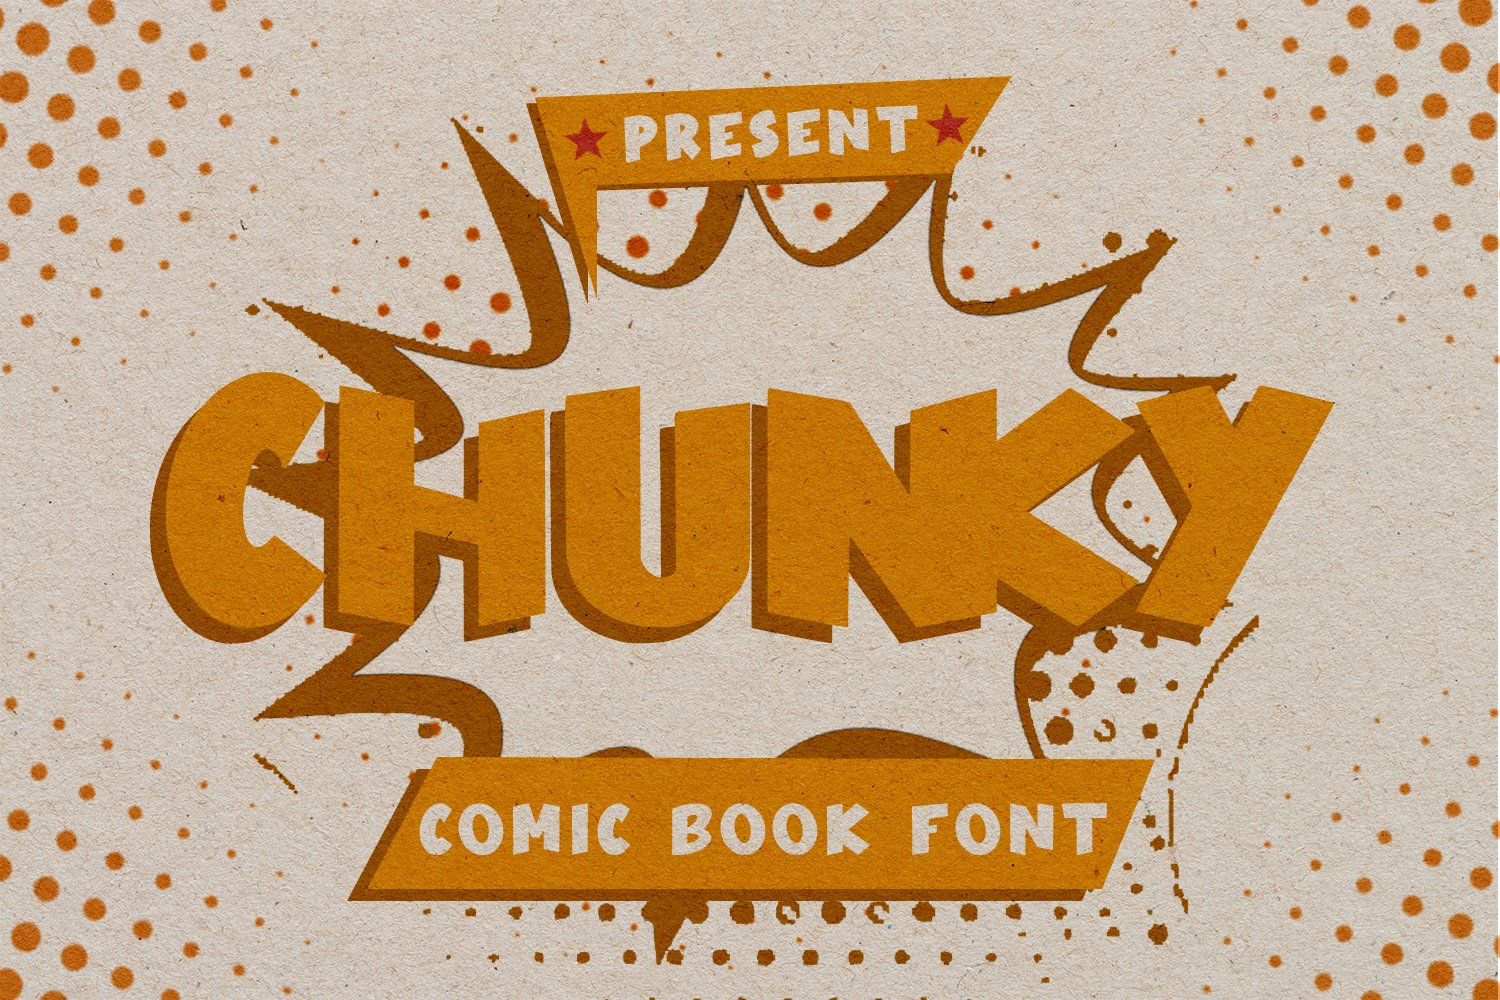 Chunky - Comic Book Font cover image.